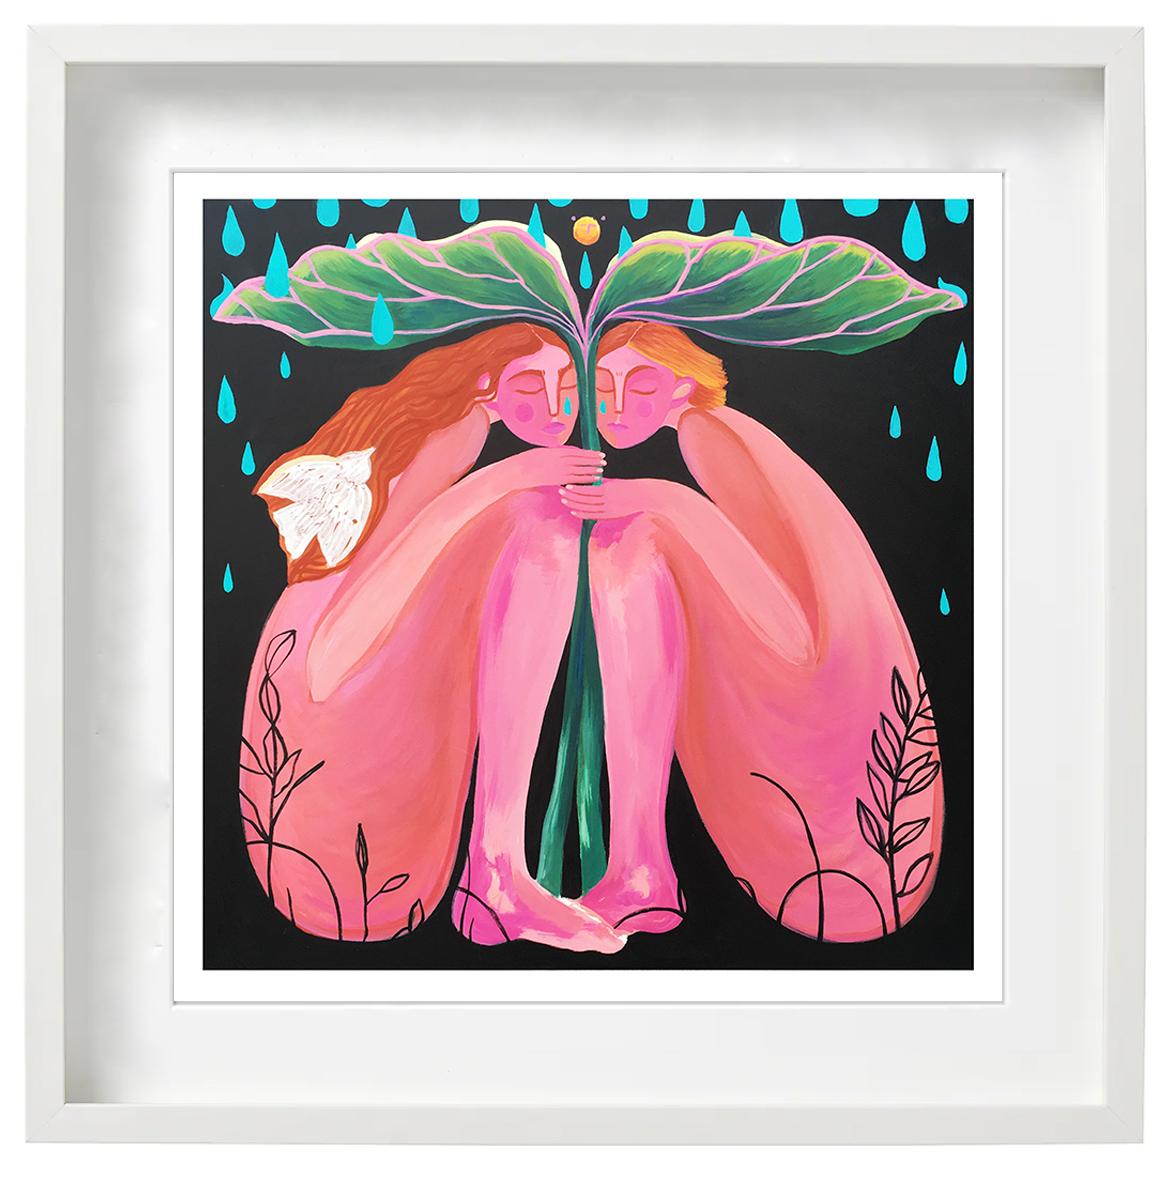 Safe, 2020, limited edition signed giclée on Moab paper, figurative, women, pink - Contemporary Print by Rebecca Johnson